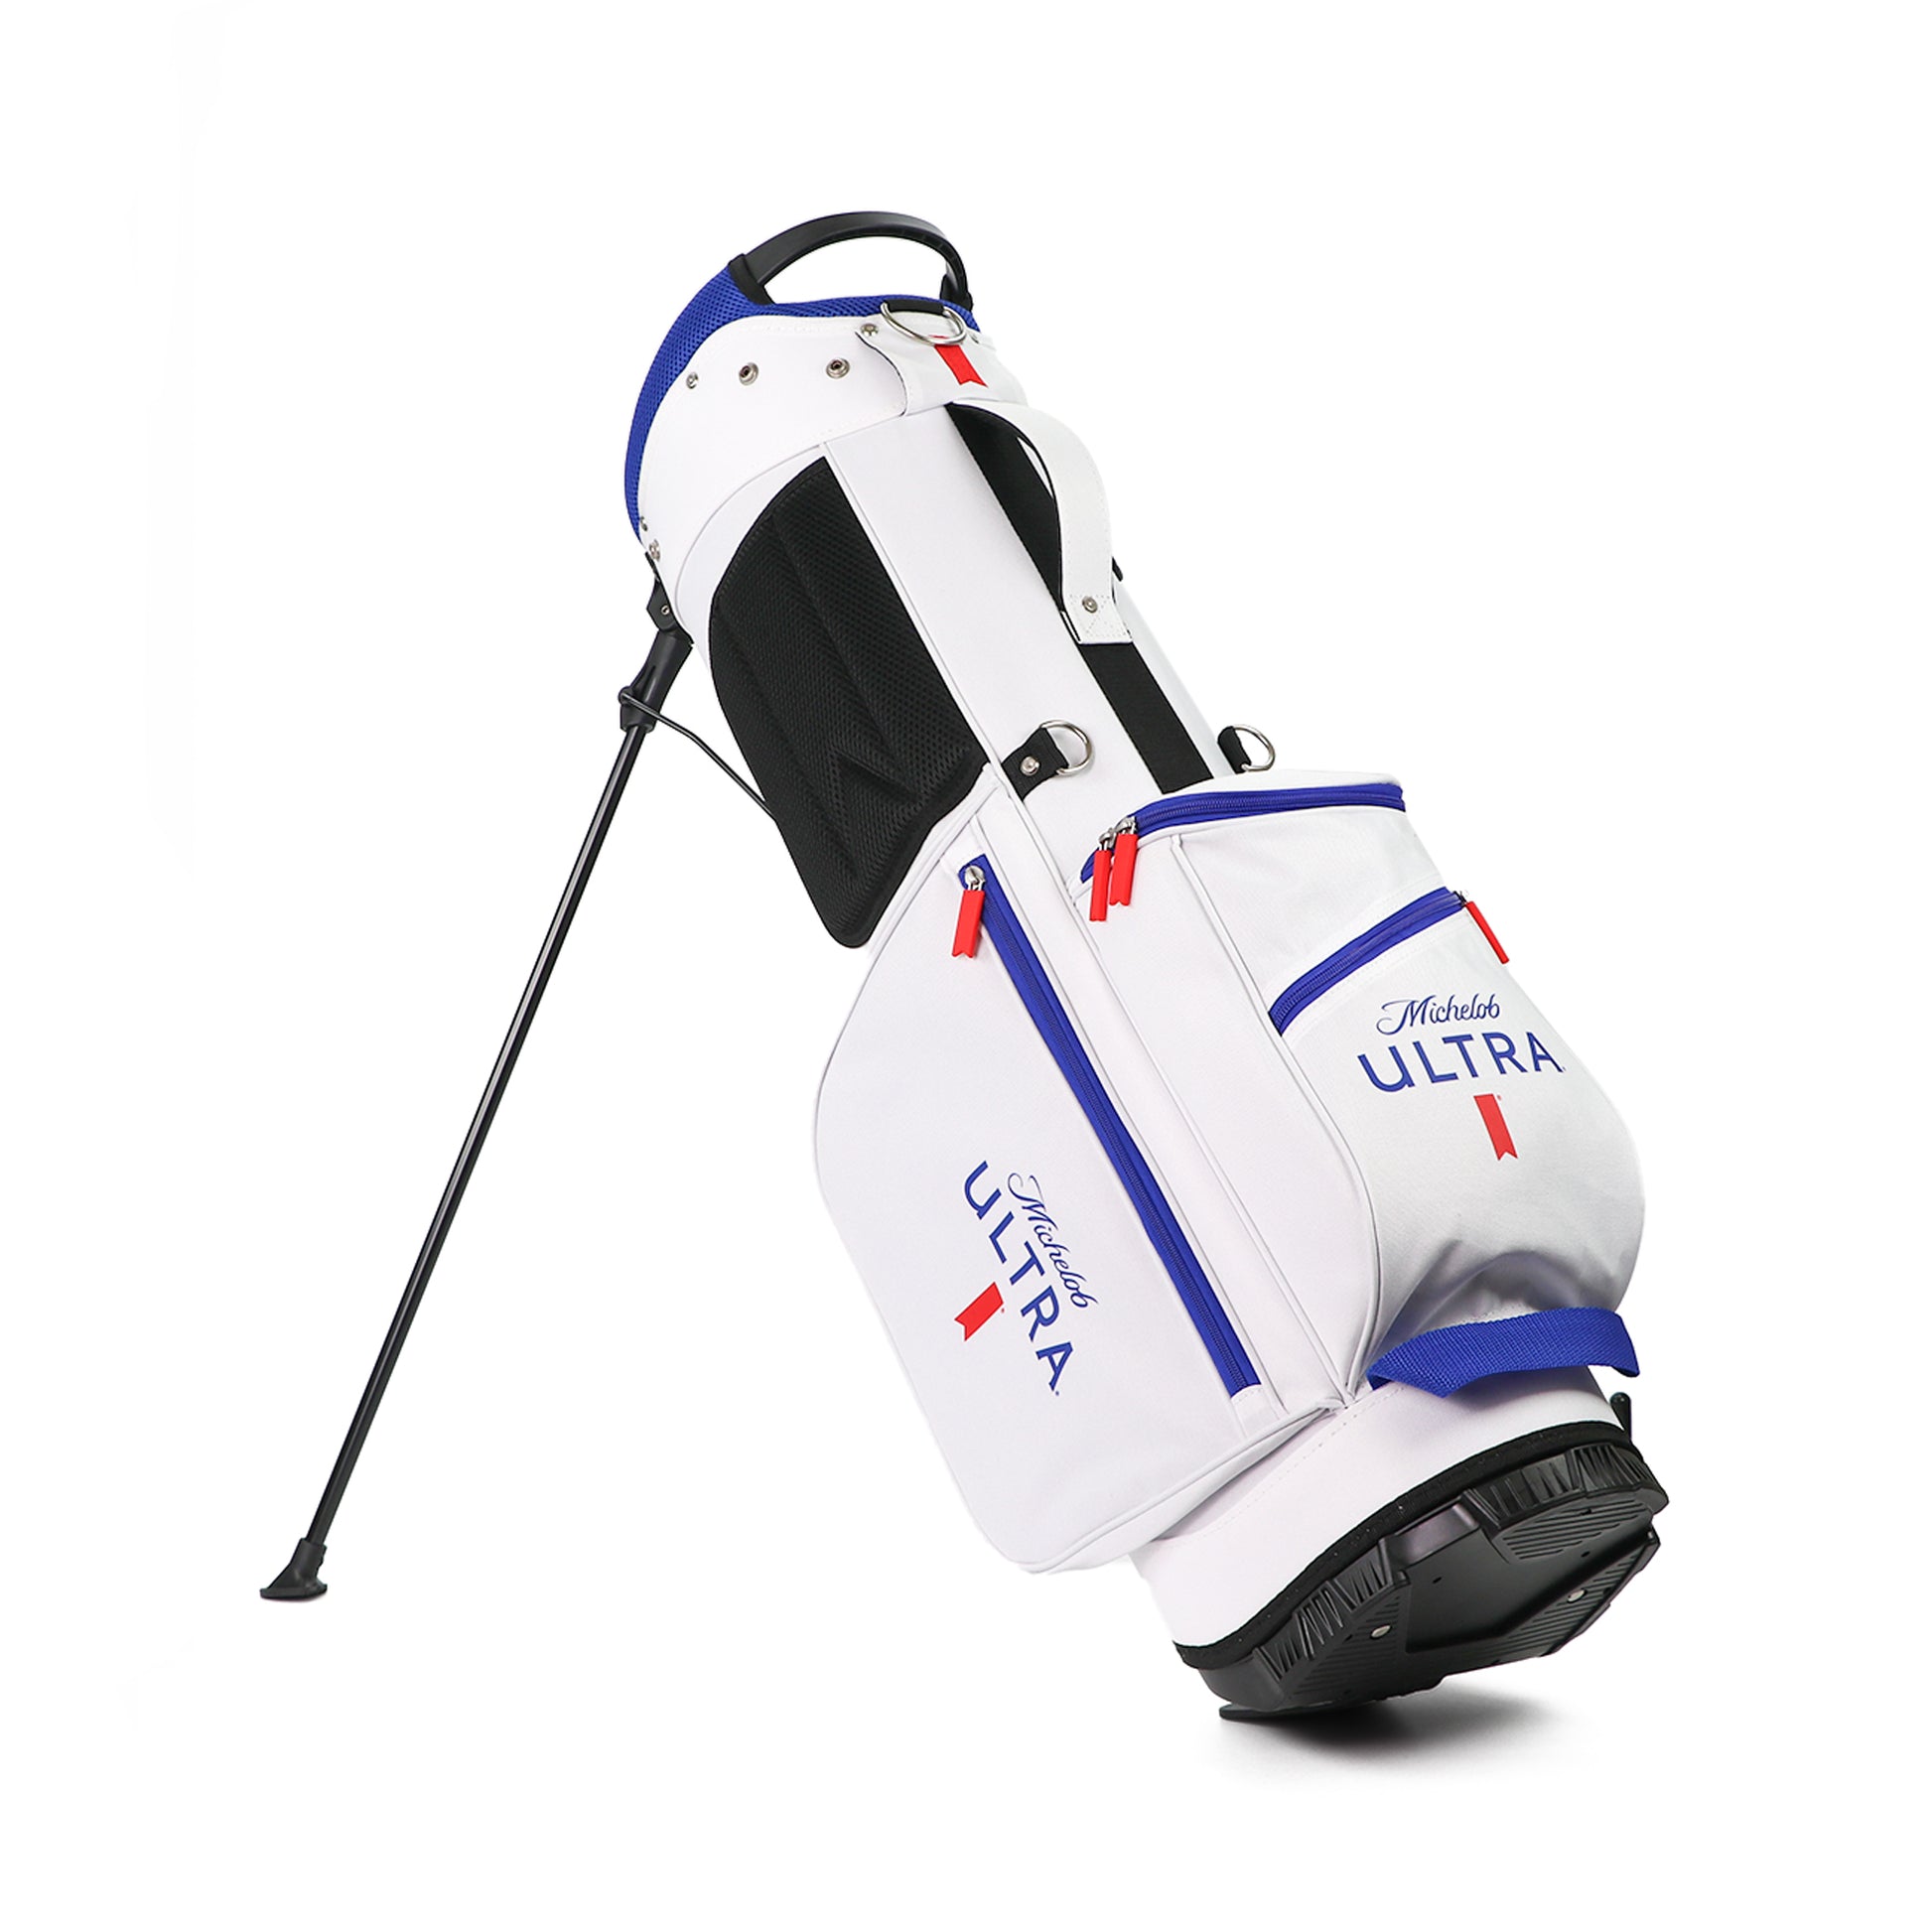 Michelob ULTRA Golf bag on stand